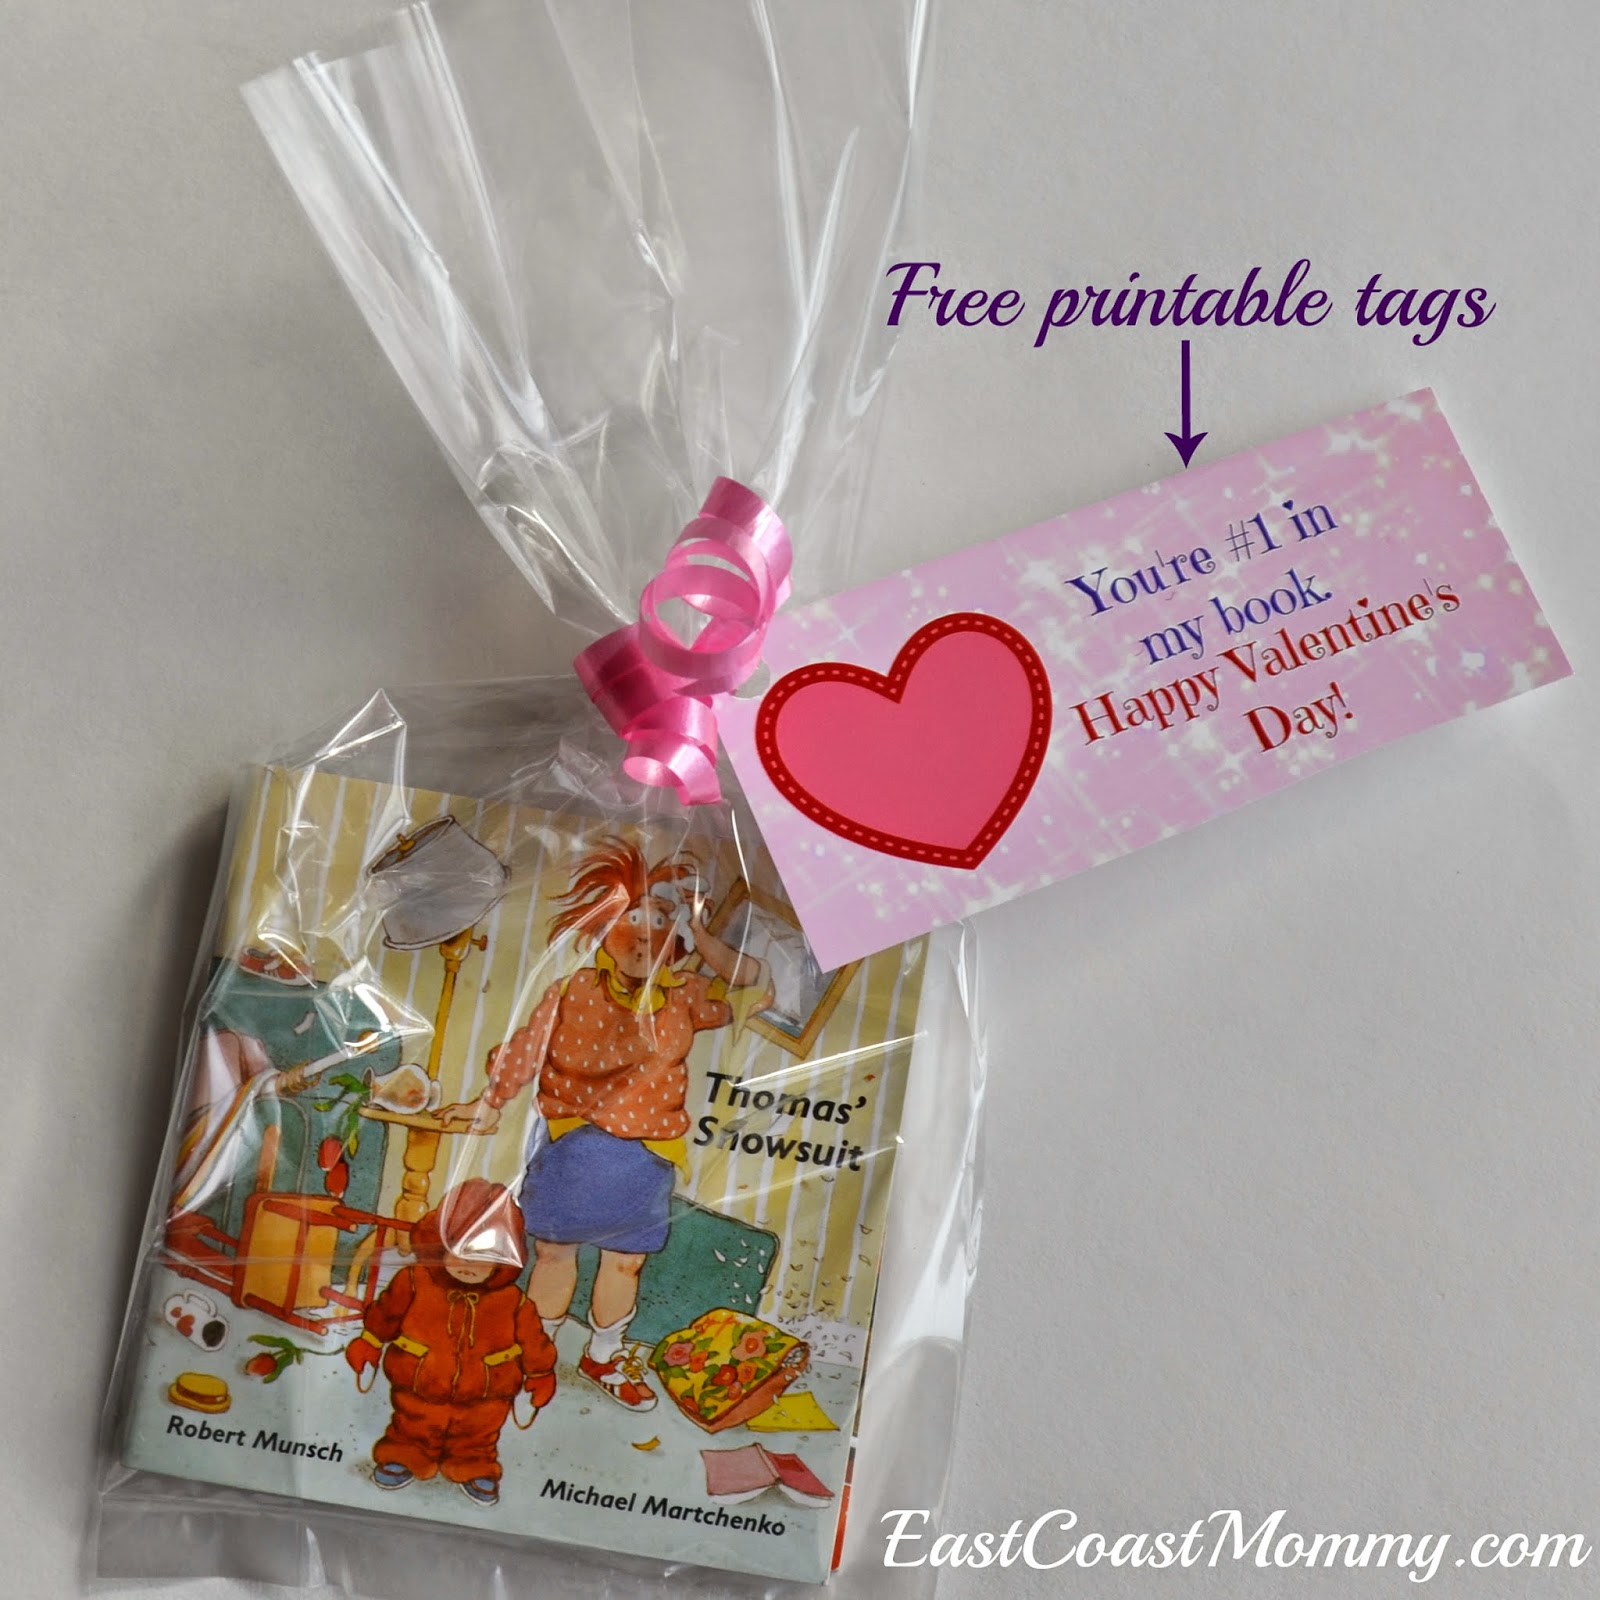 East Coast Mommy: Book Valentine {With Free Printable Tags} - Free Printable Valentine Books